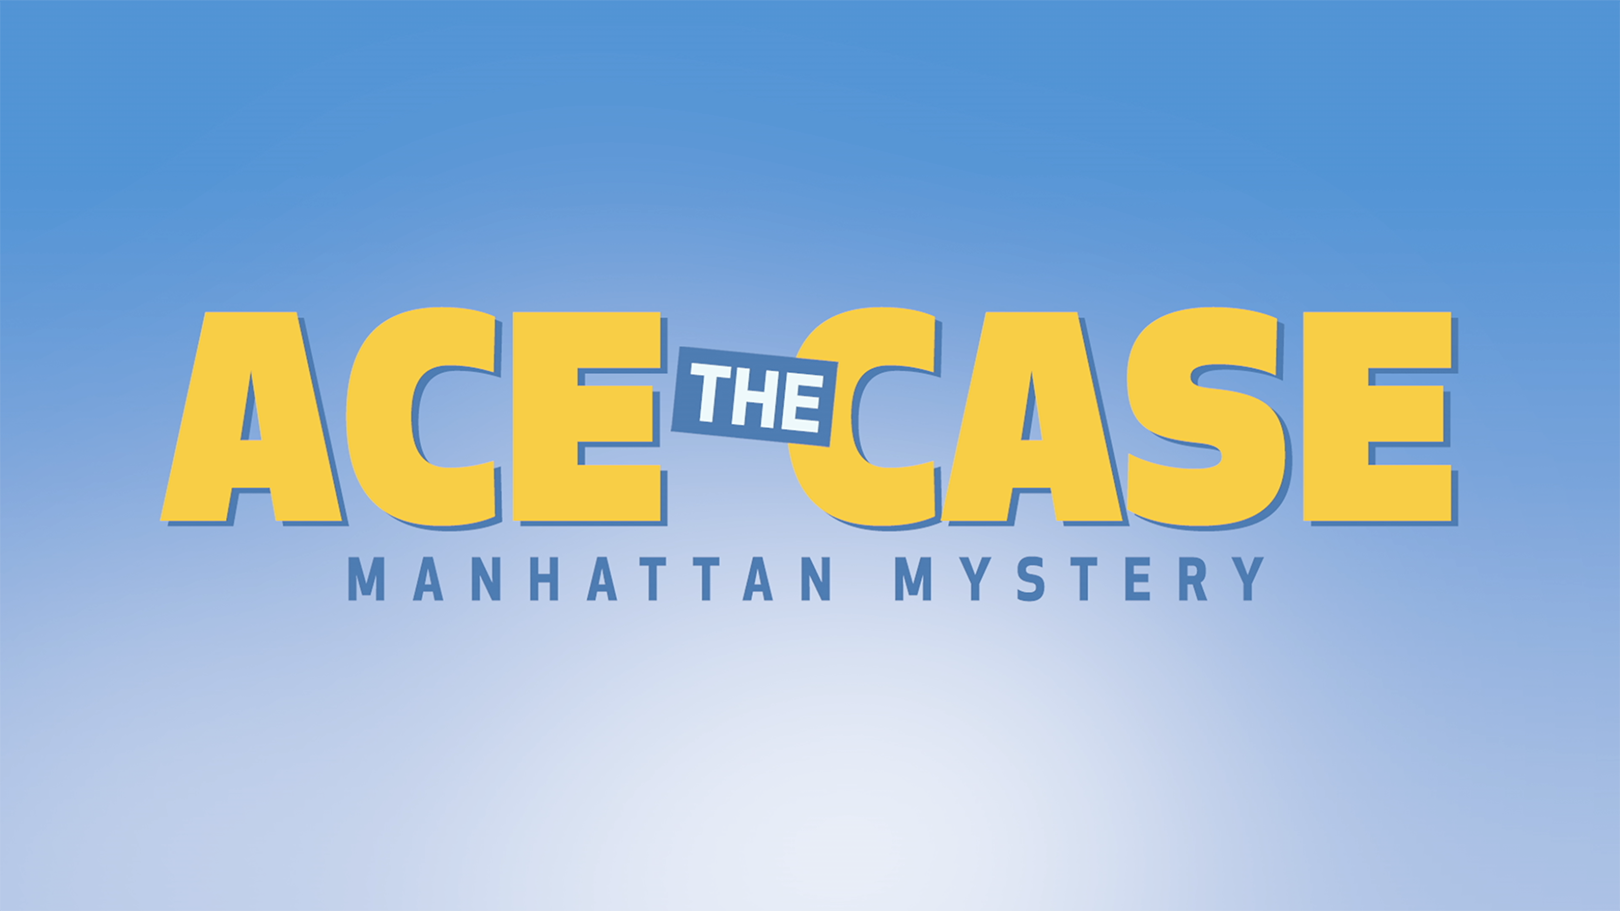 “Ace the Case: Manhattan Mystery” Official Trailer